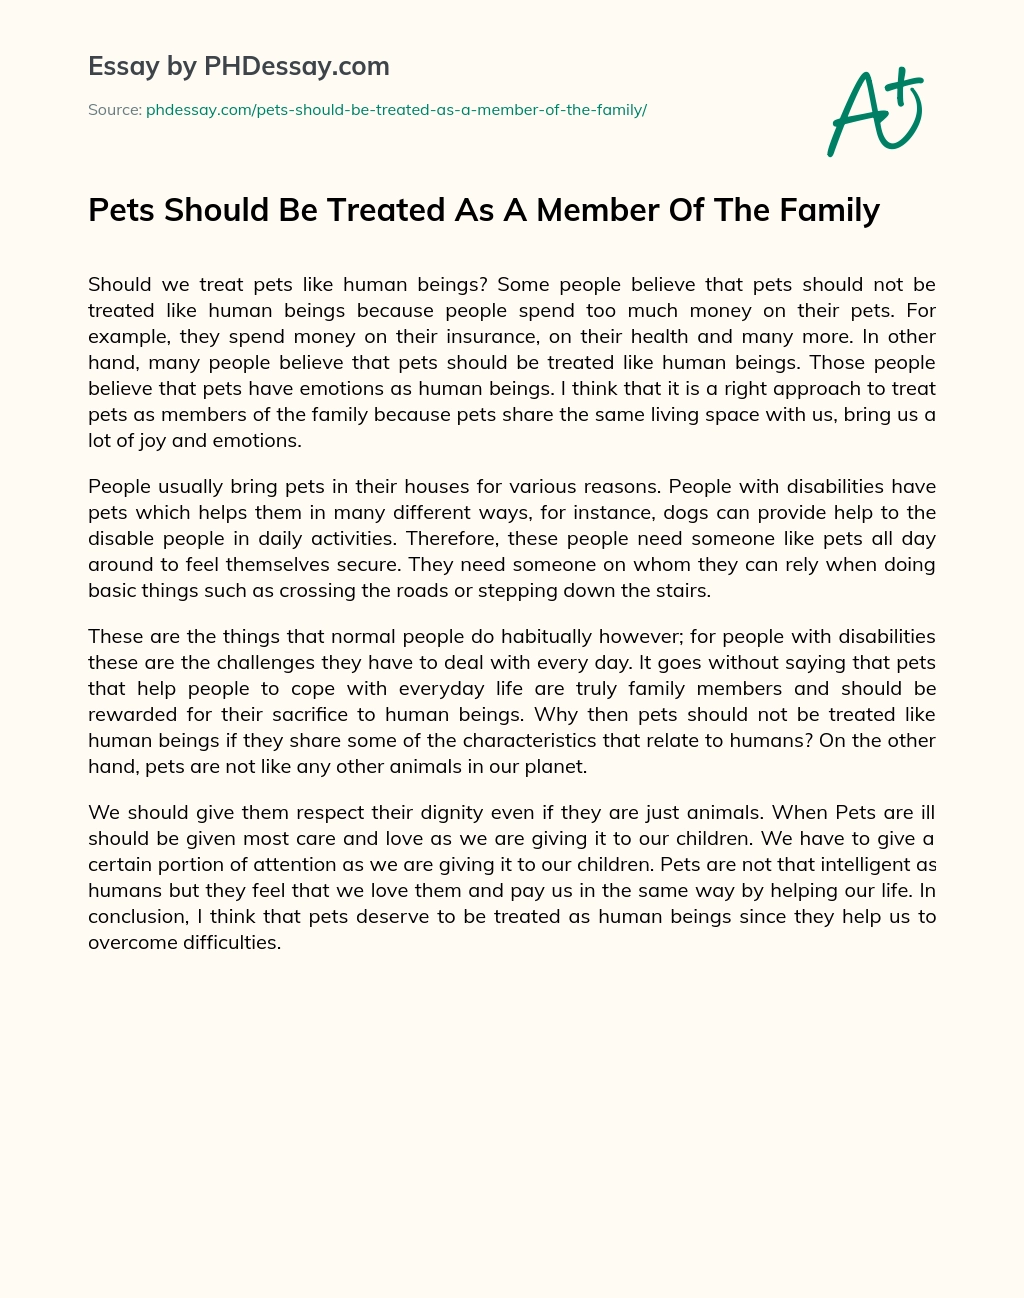 Pets Should Be Treated As A Member Of The Family essay